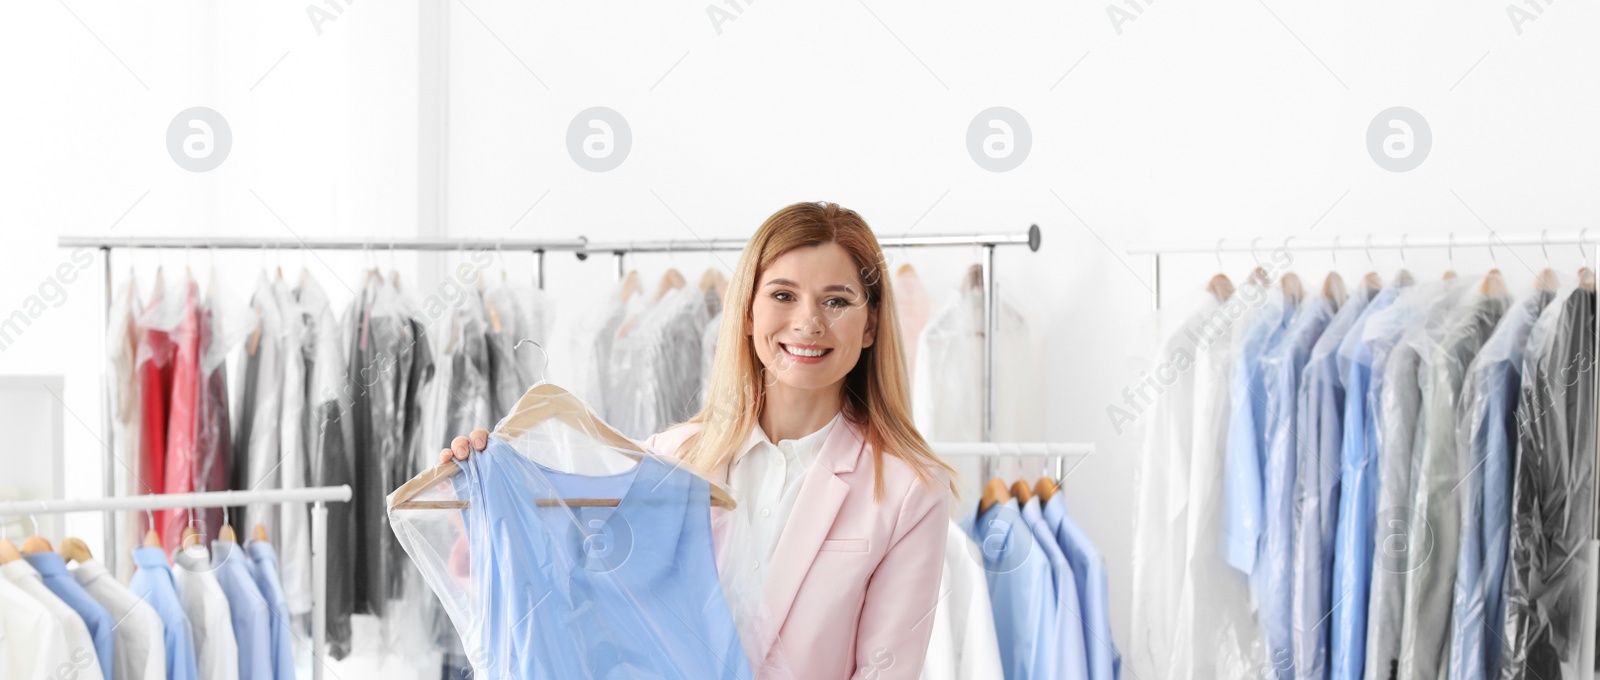 Image of Woman holding hanger with dress in plastic bag, banner design. Dry-cleaning service